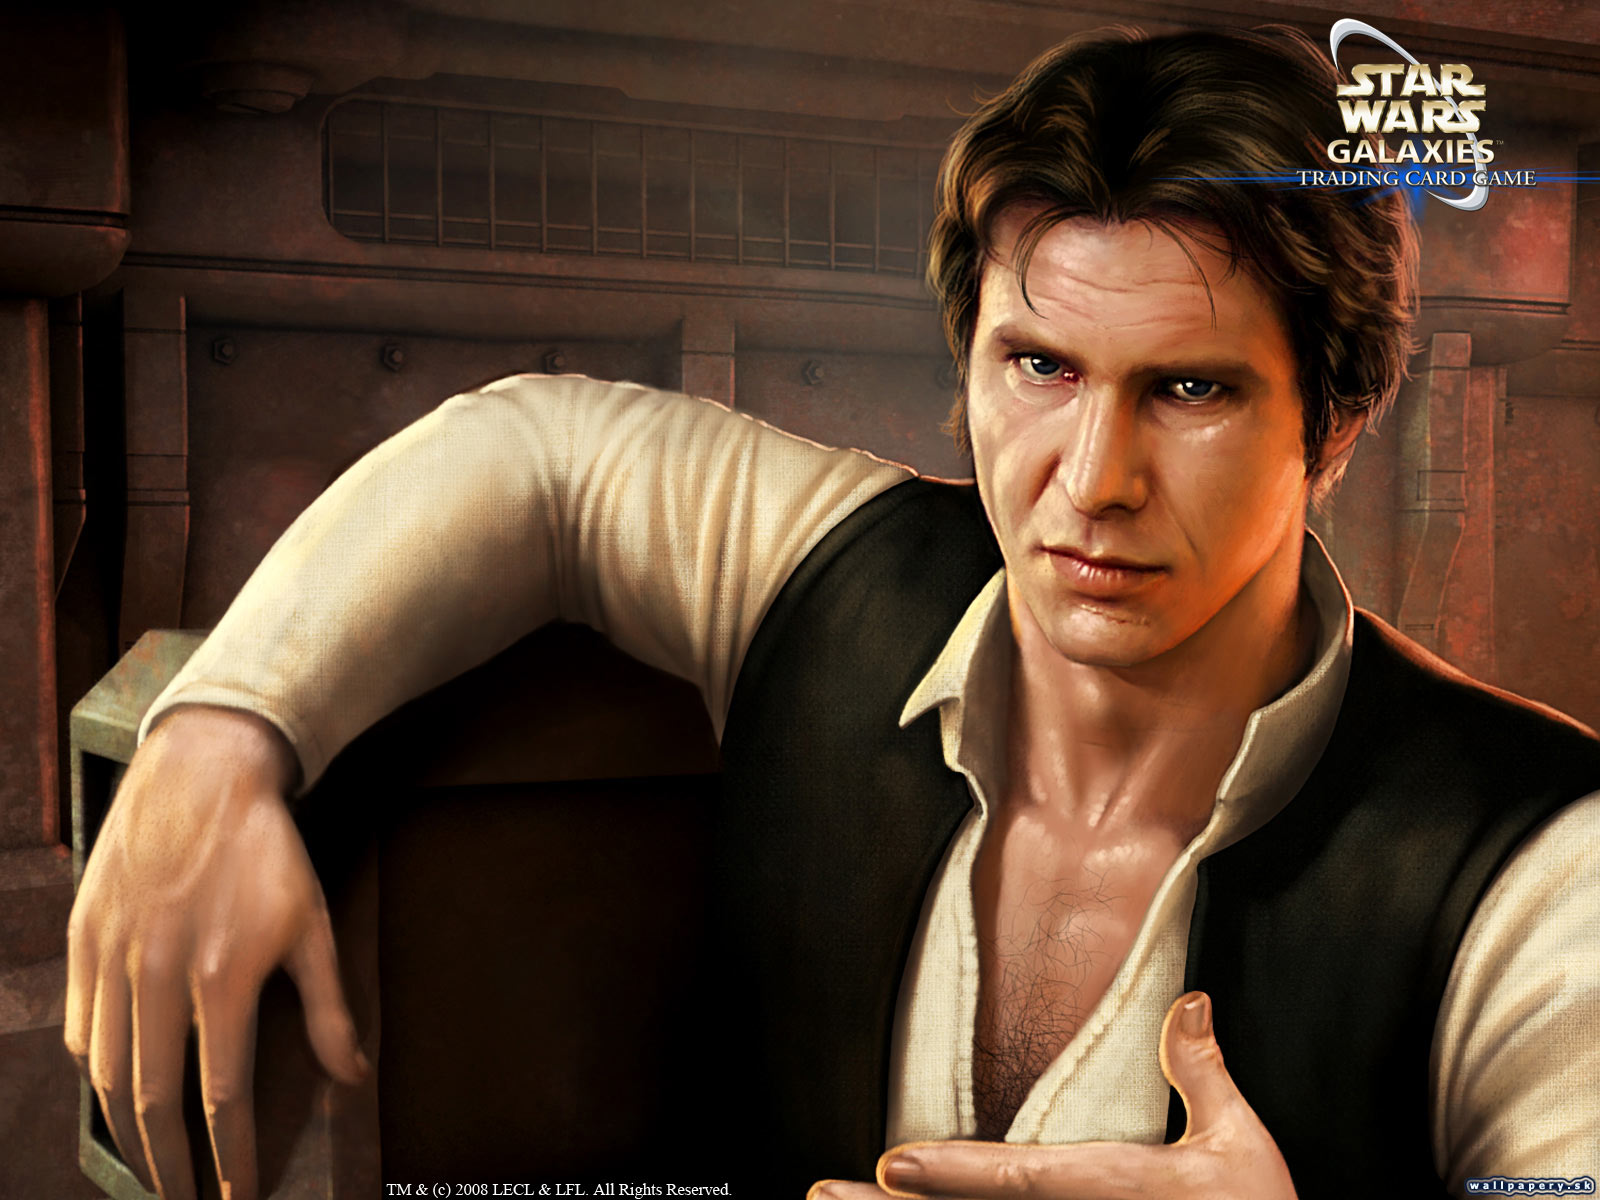 Star Wars Galaxies - Trading Card Game: Champions of the Force - wallpaper 22